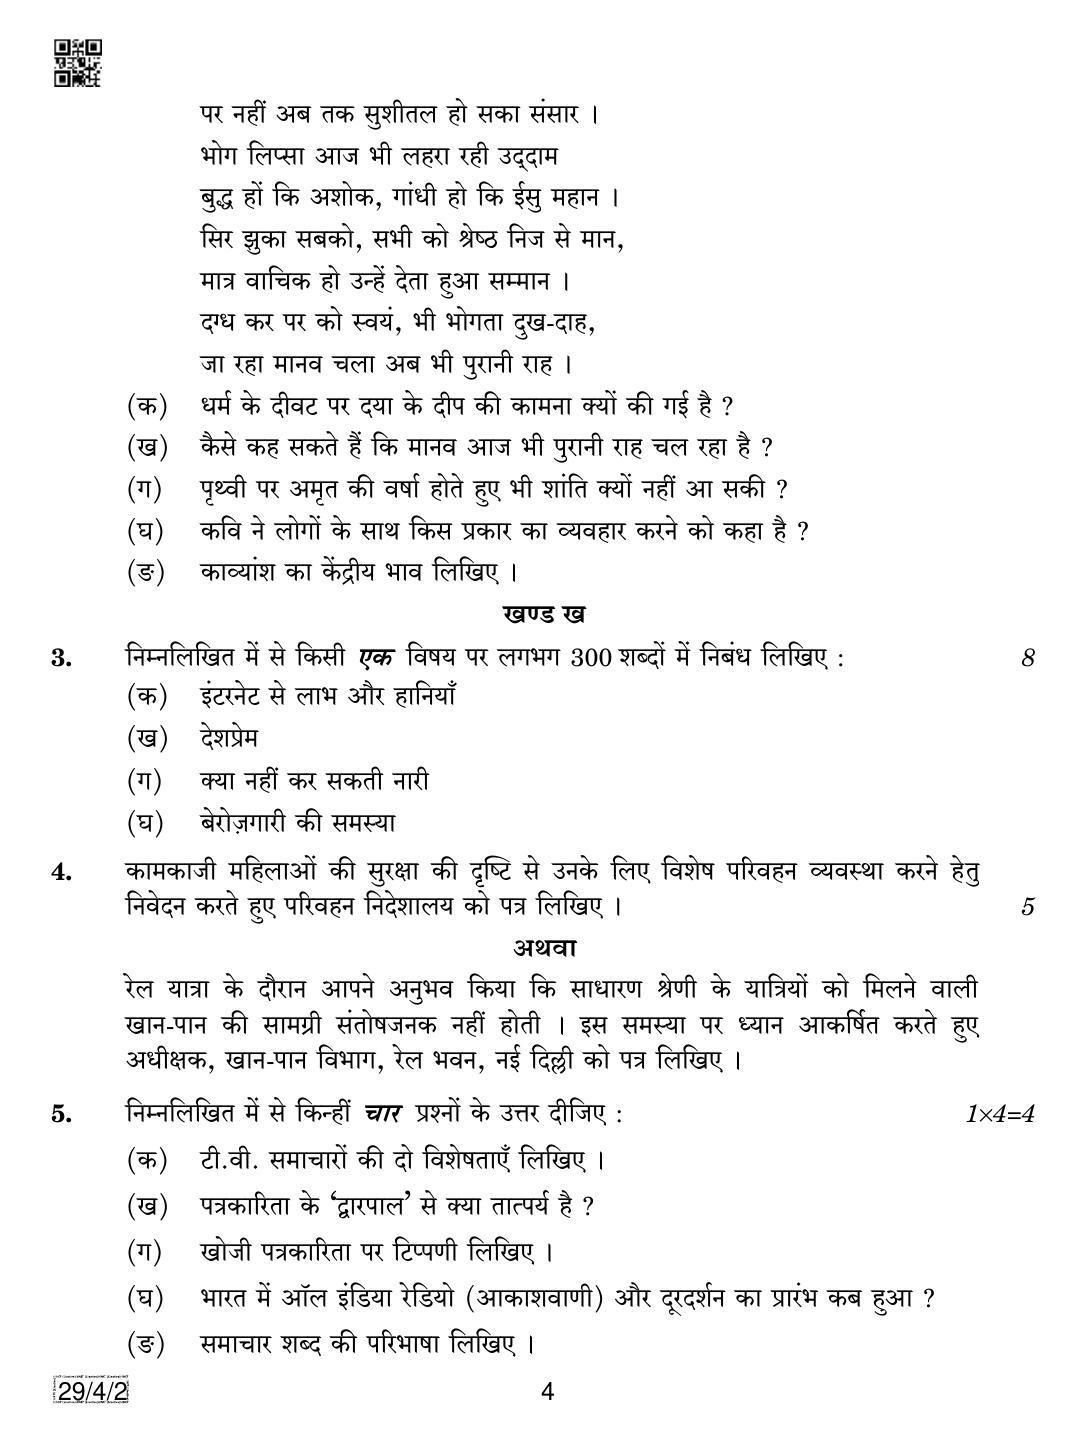 CBSE Class 12 29-4-2 Hindi Elective 2019 Question Paper - Page 4